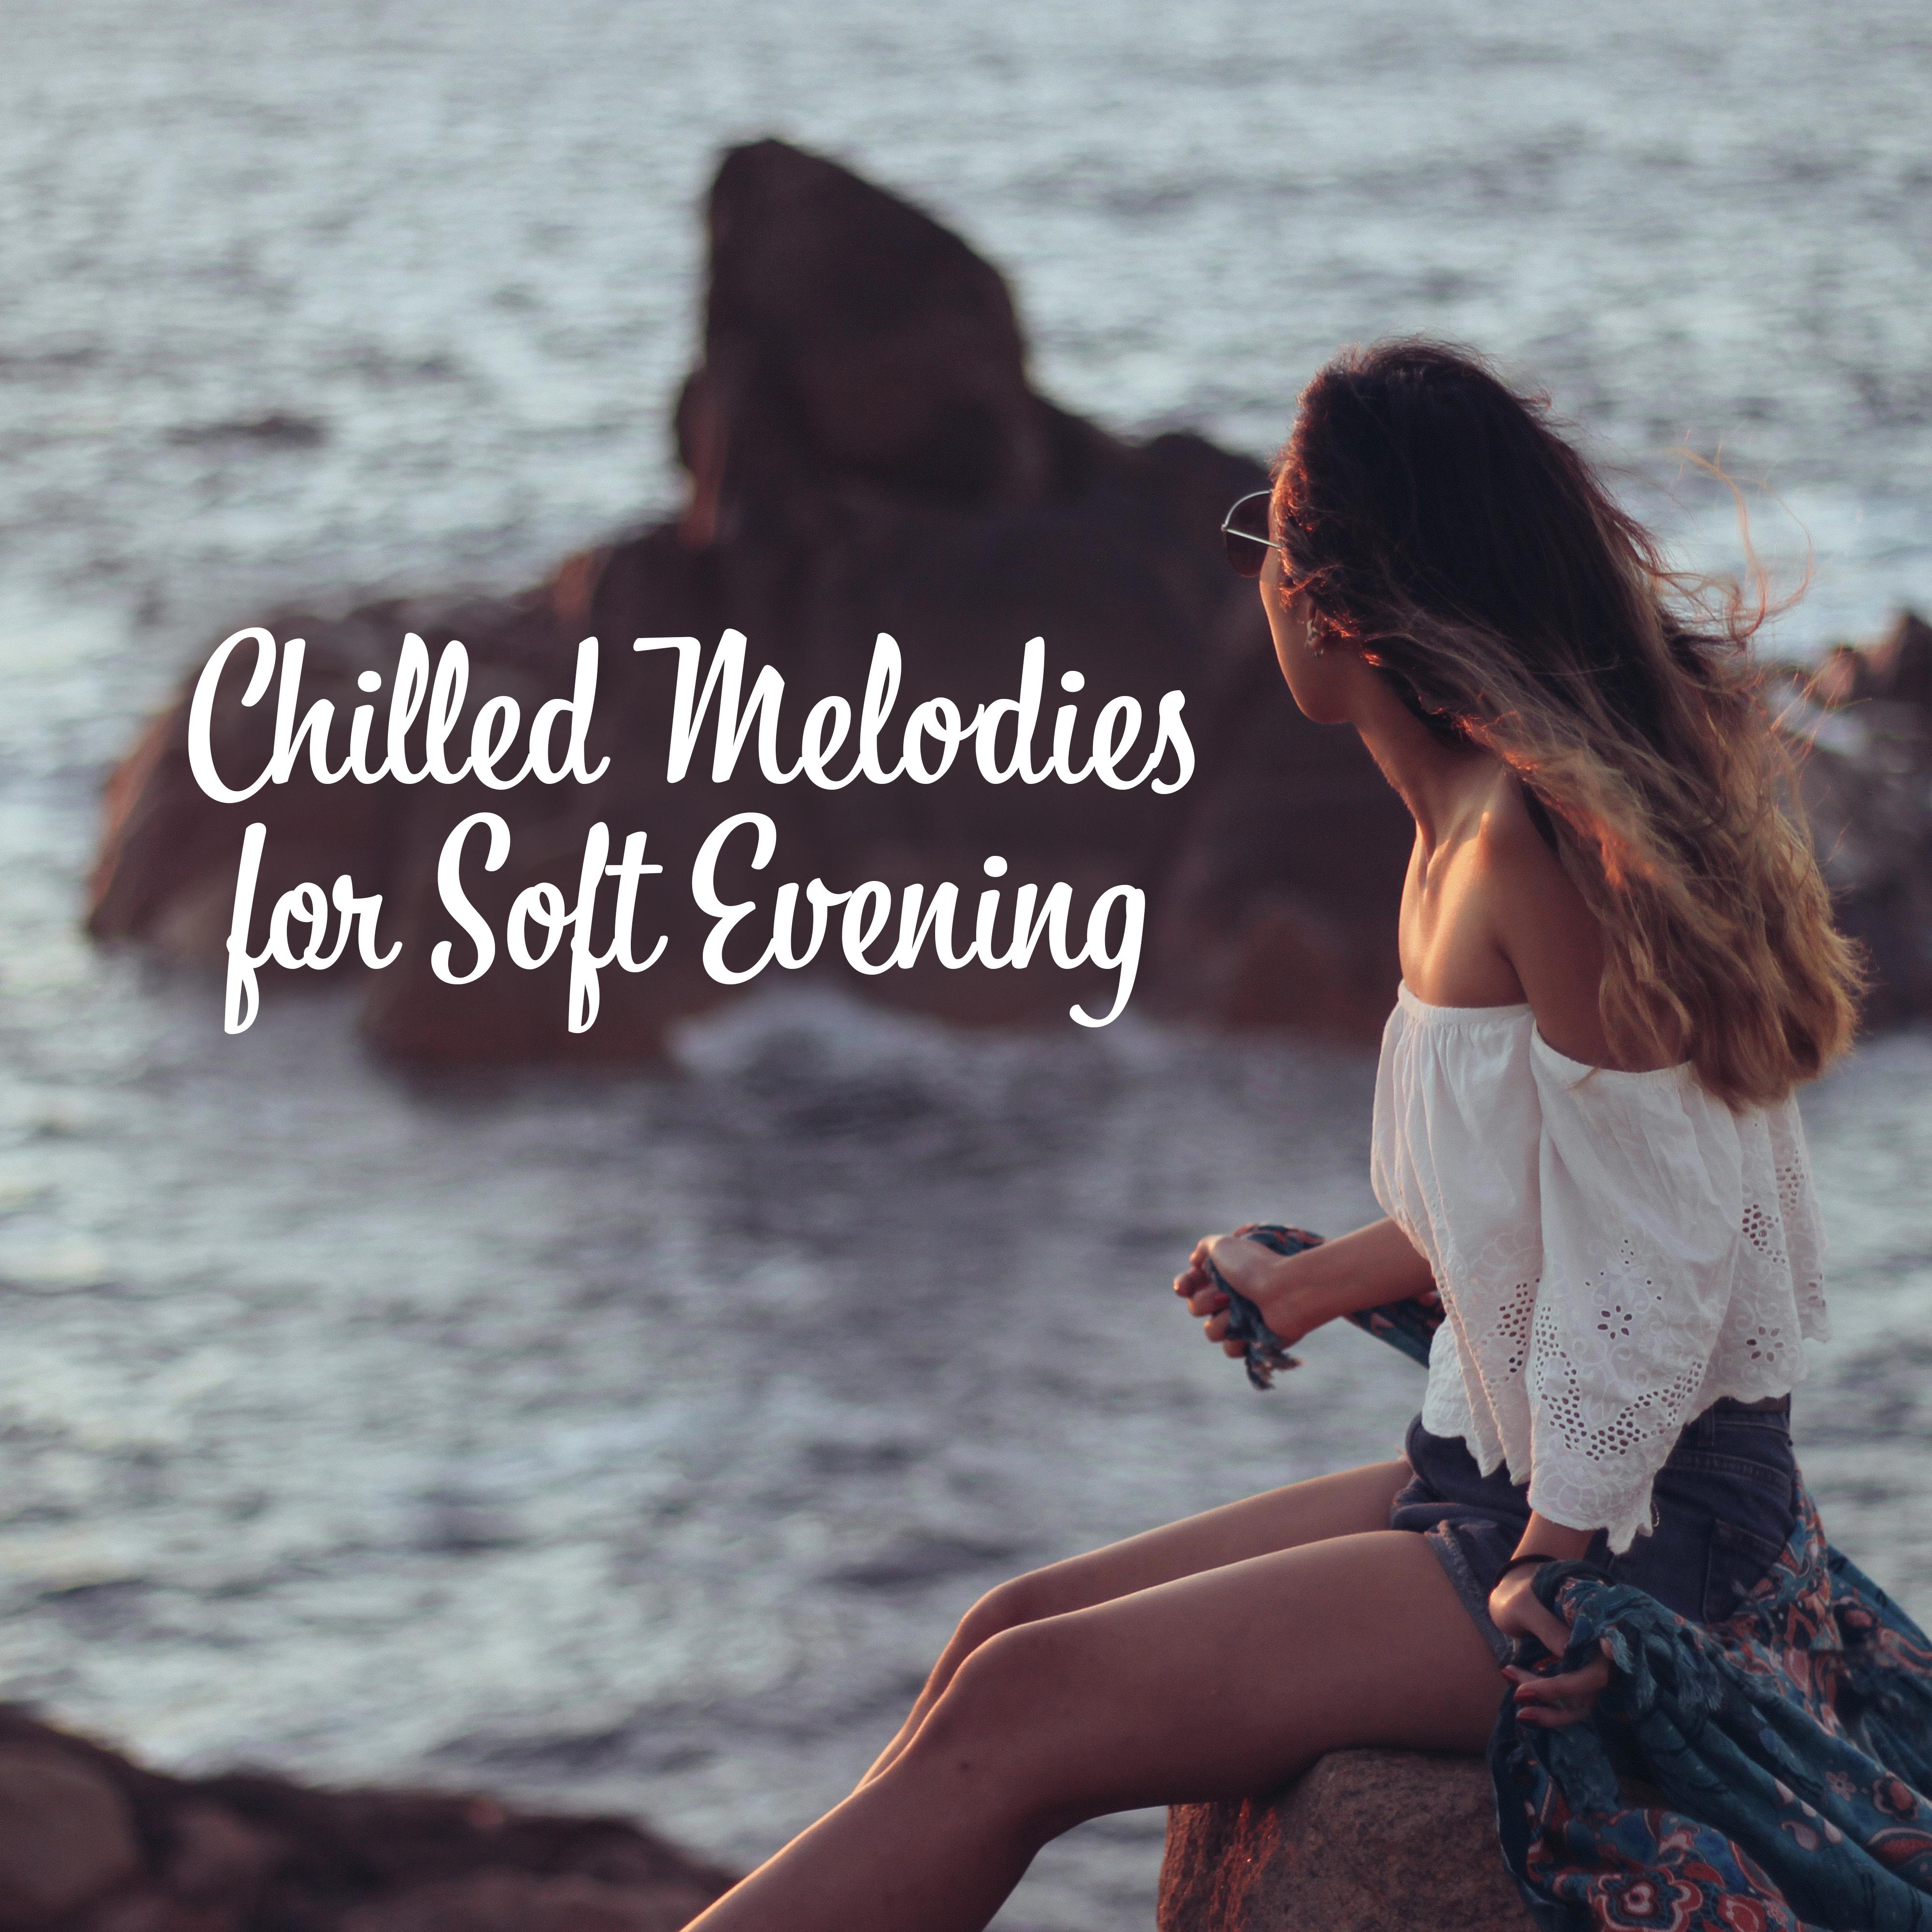 Chilled Melodies for Soft Evening